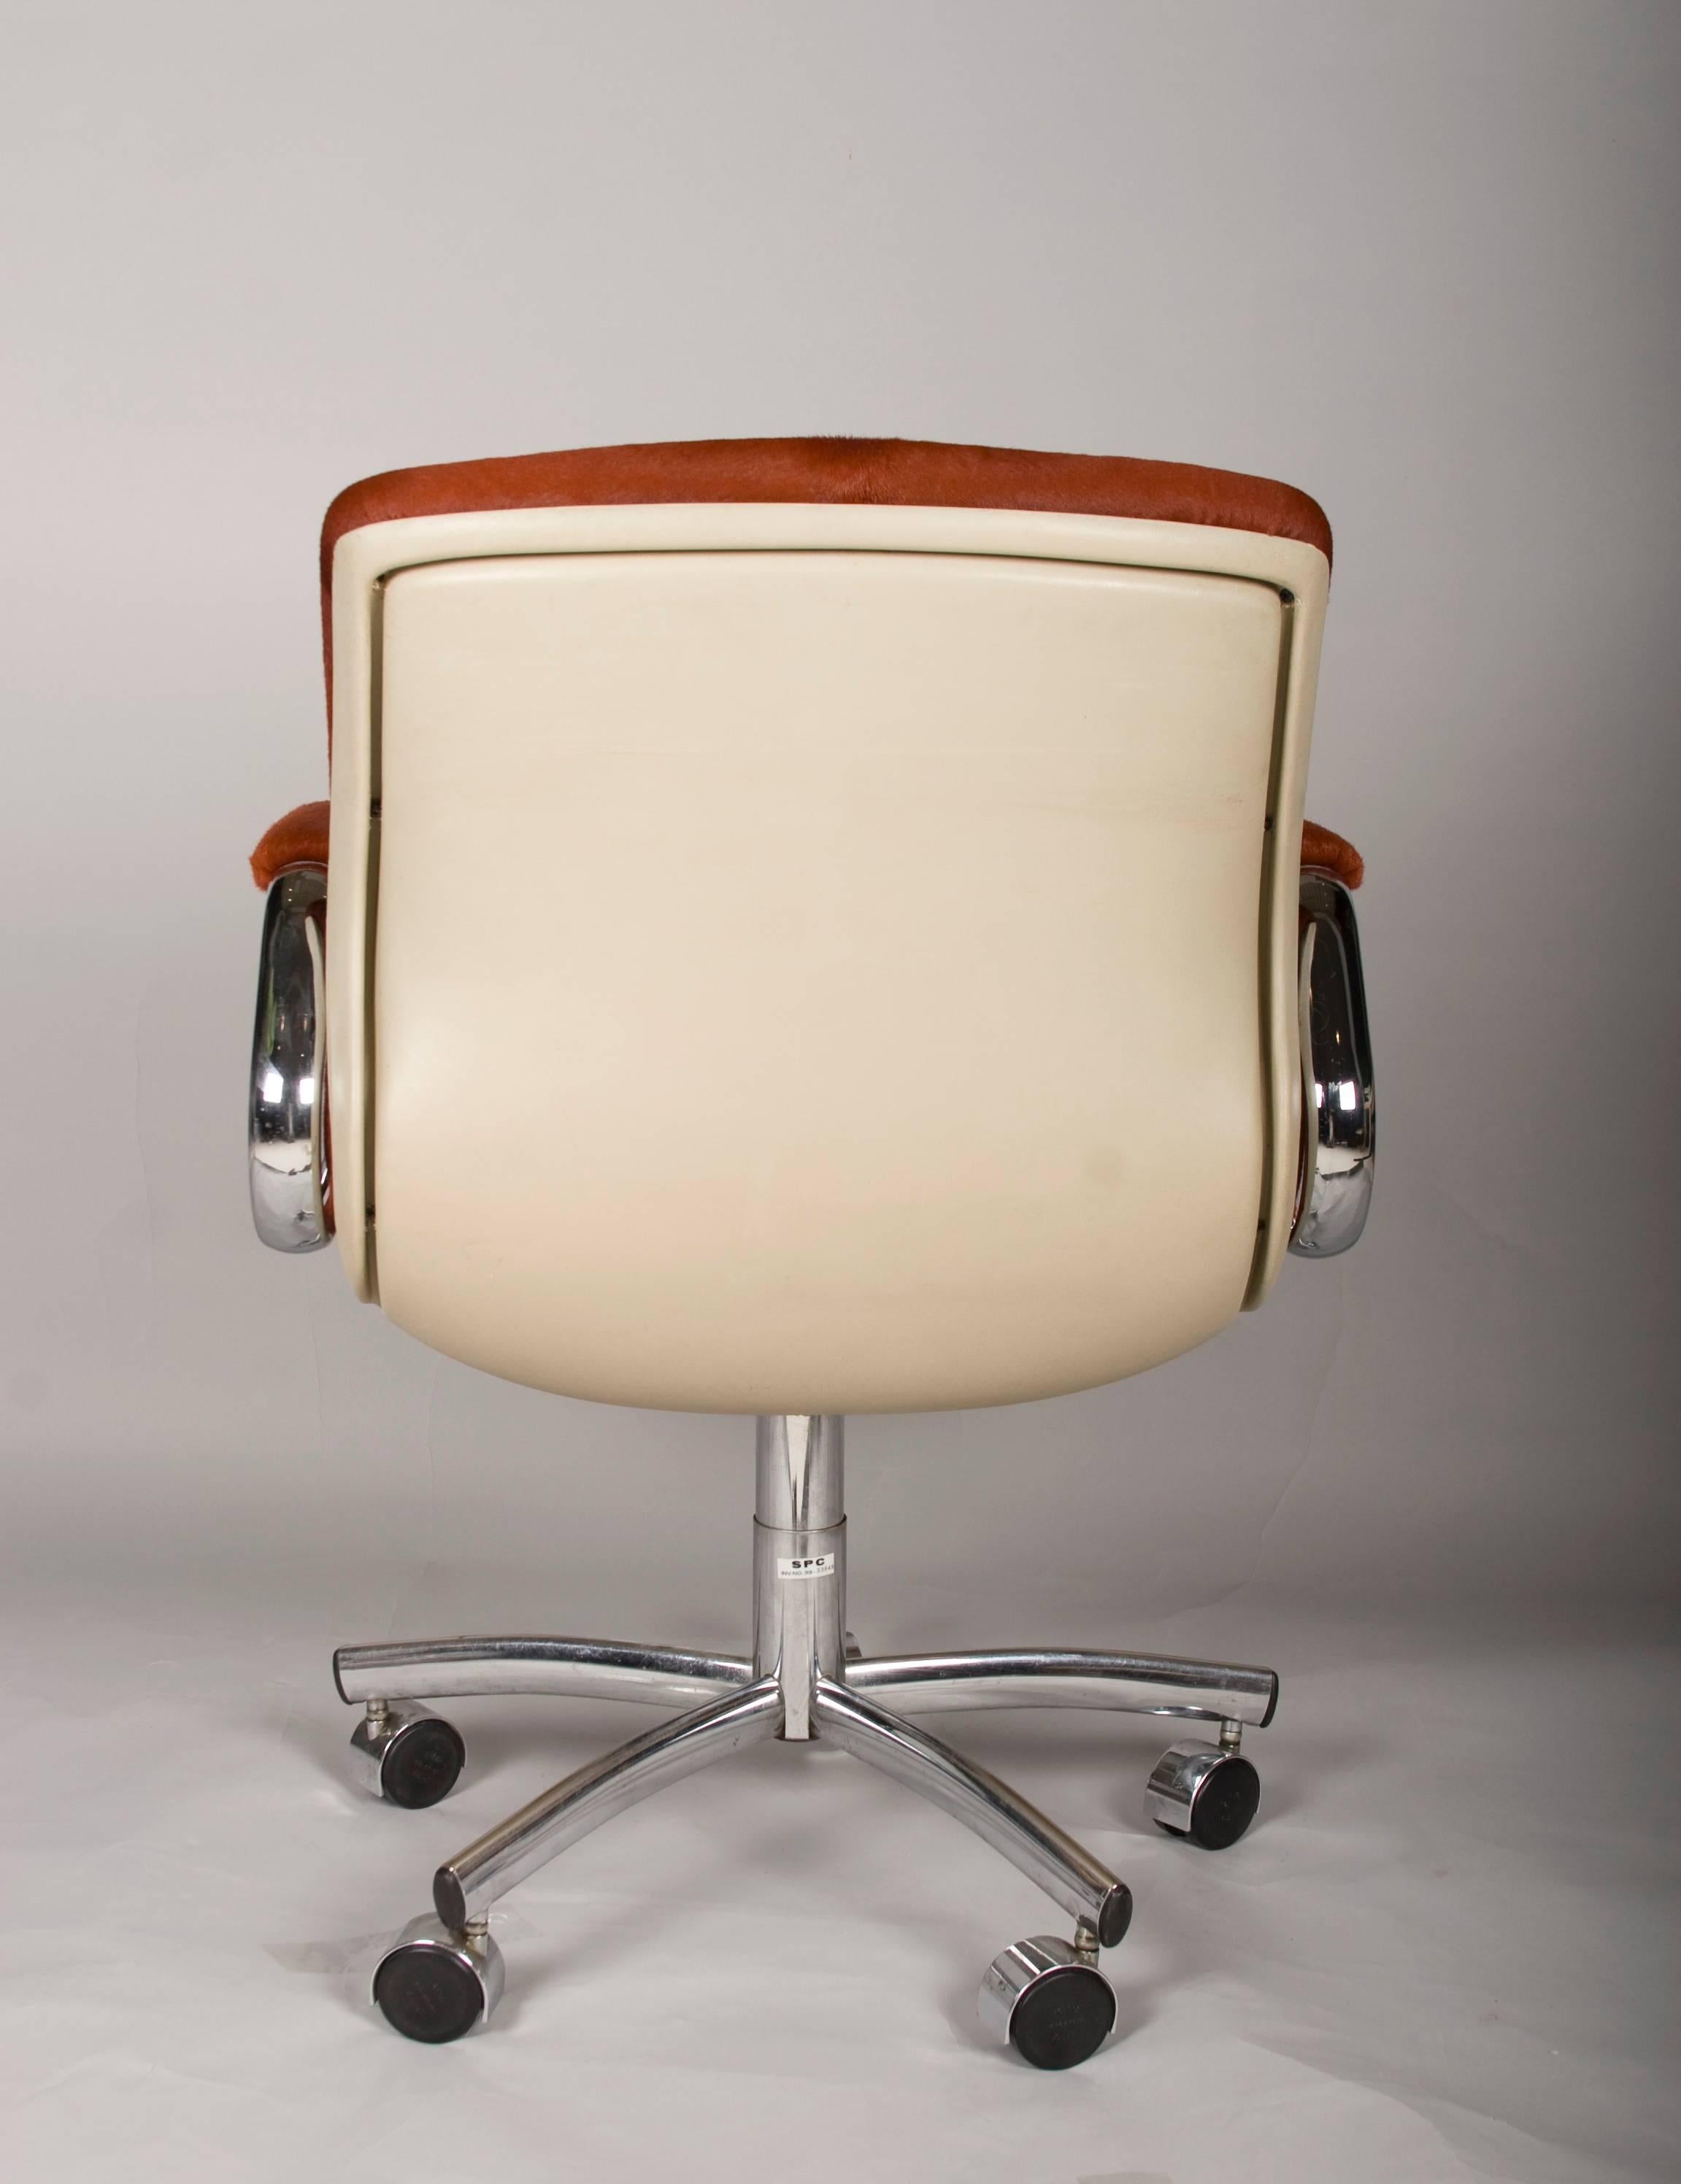 Iconic Steelcase armchair, newly upholstered in 